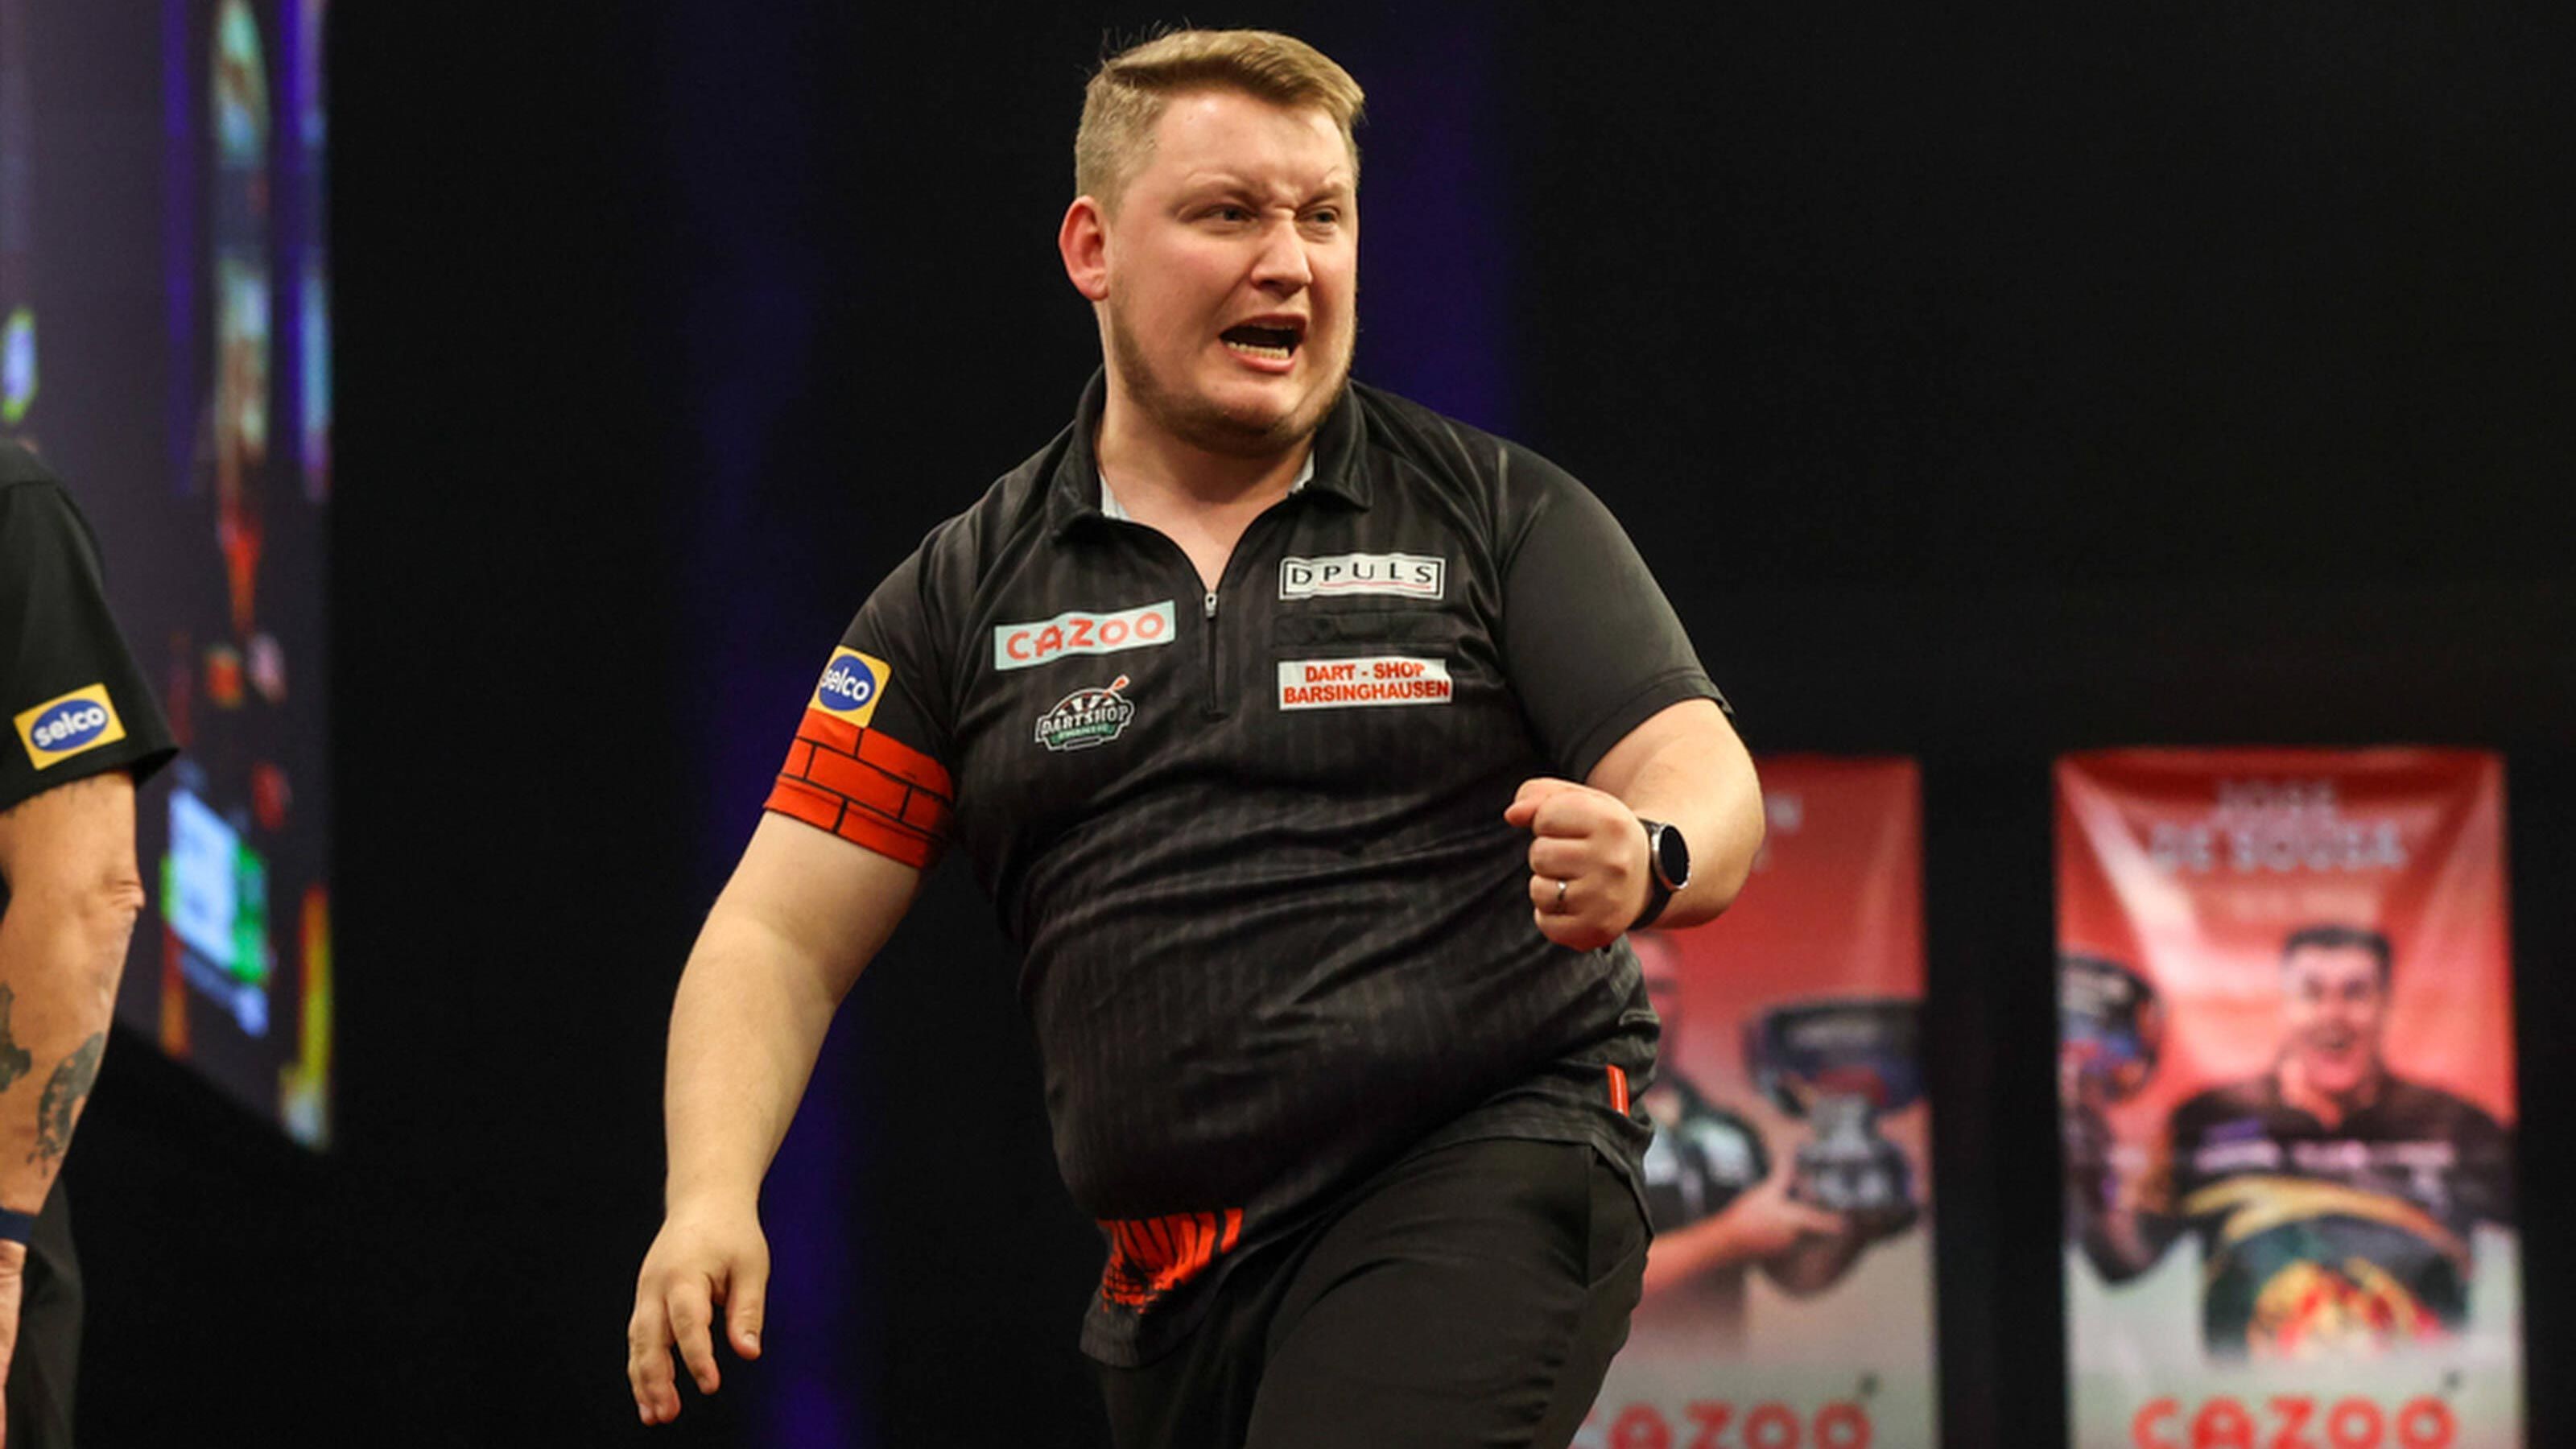 
                <strong>Martin Schindler</strong><br>
                &#x2022; <strong>WM-Teilnahmen</strong>: 4<br>&#x2022; <strong>Order of Merit</strong>: Platz 29 (164.250 Pfund)<br>&#x2022; <strong>Darts</strong>: 23g One80<br>&#x2022; <strong>Walk-On-Song</strong>: Another Brick in The Wall - Pink Floyd<br>&#x2022; <strong>Erstes Spiel</strong>: 2. Runde - Freitag, 23. Dezember 2022, ab 20 Uhr gegen Lukeman/Yamamoto<br>
              